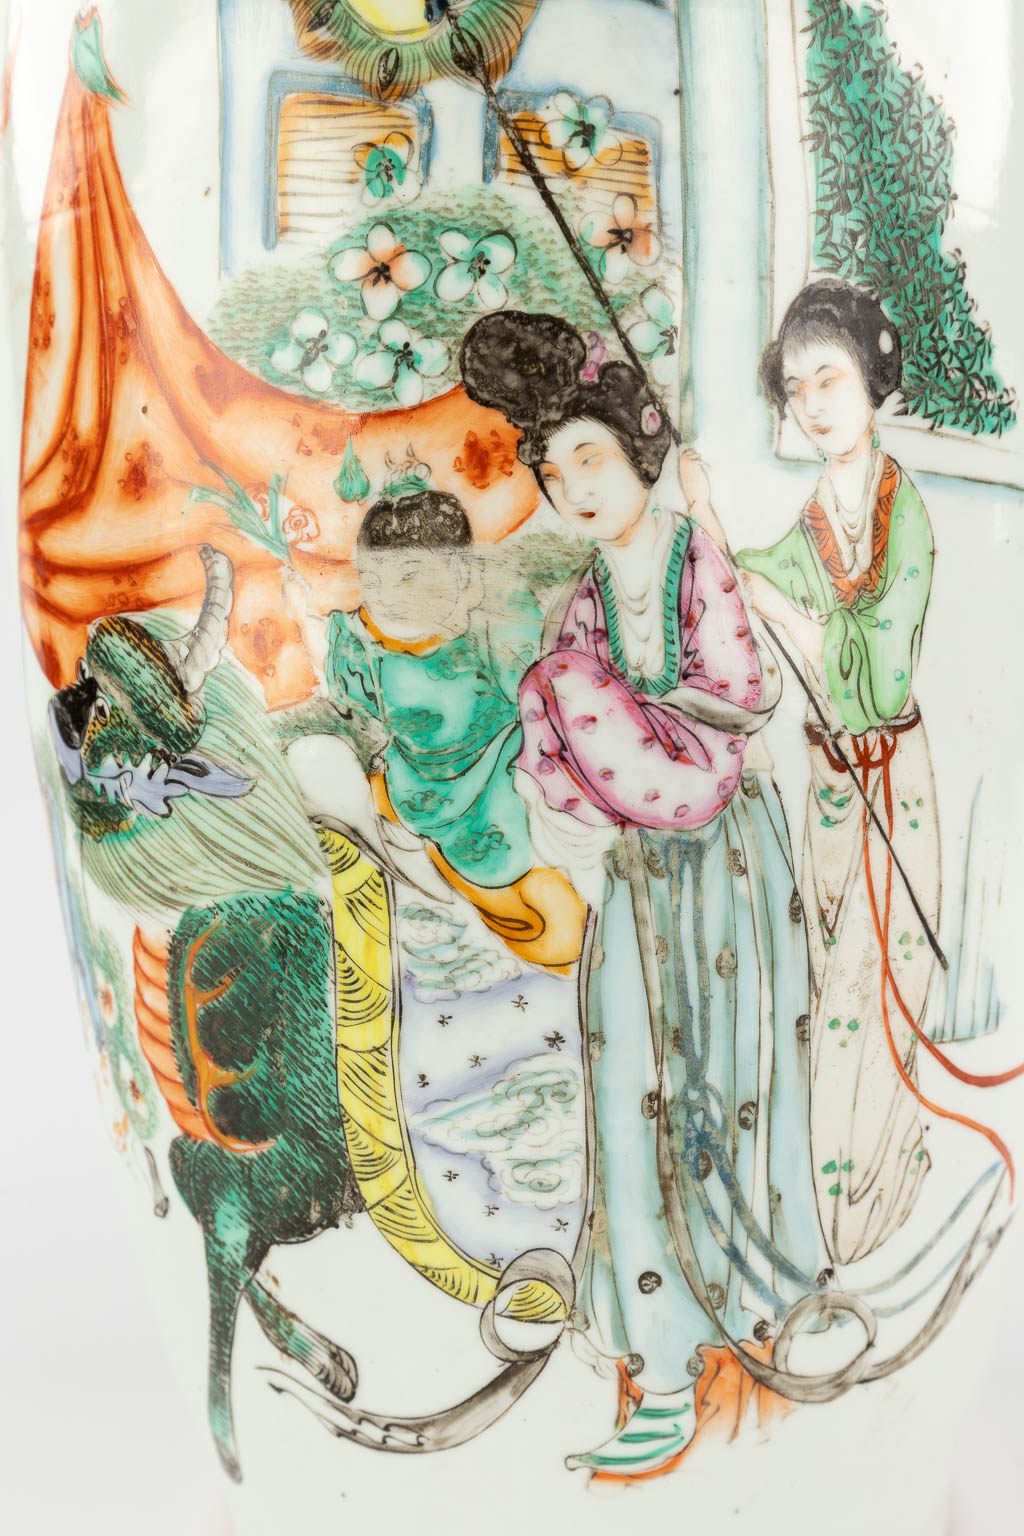 A Chinese vase decorated with a mythological figurine, ladies and children. 19th/20th C. (H: 59 x D: 22 cm)